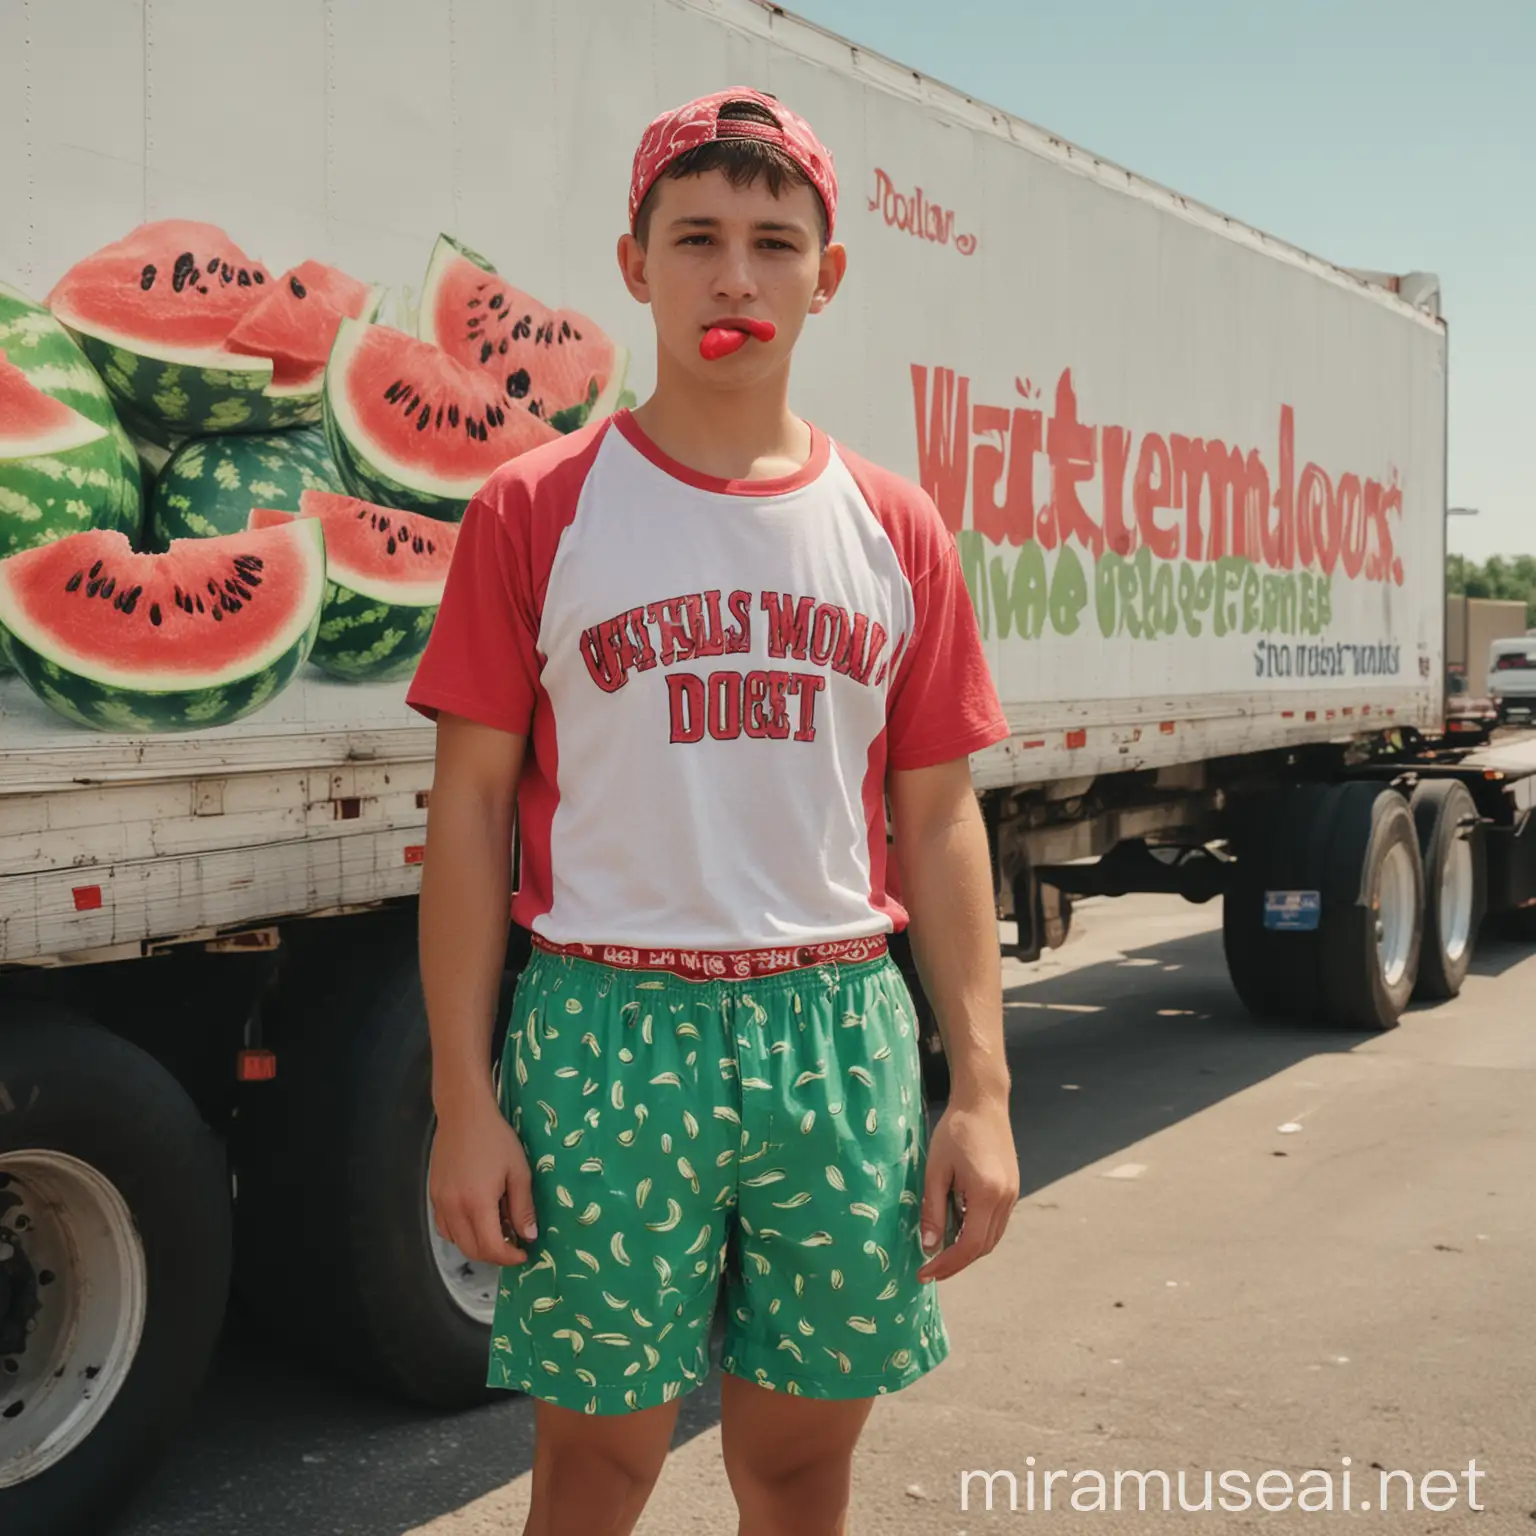 Ikbol, Isakov, Ikbolzhon, Chicago, Jewel Osco, Dollar, watermelons from Florida, selling watermelon in semi trailer truck, in shorts and old T-shirt, smoking,